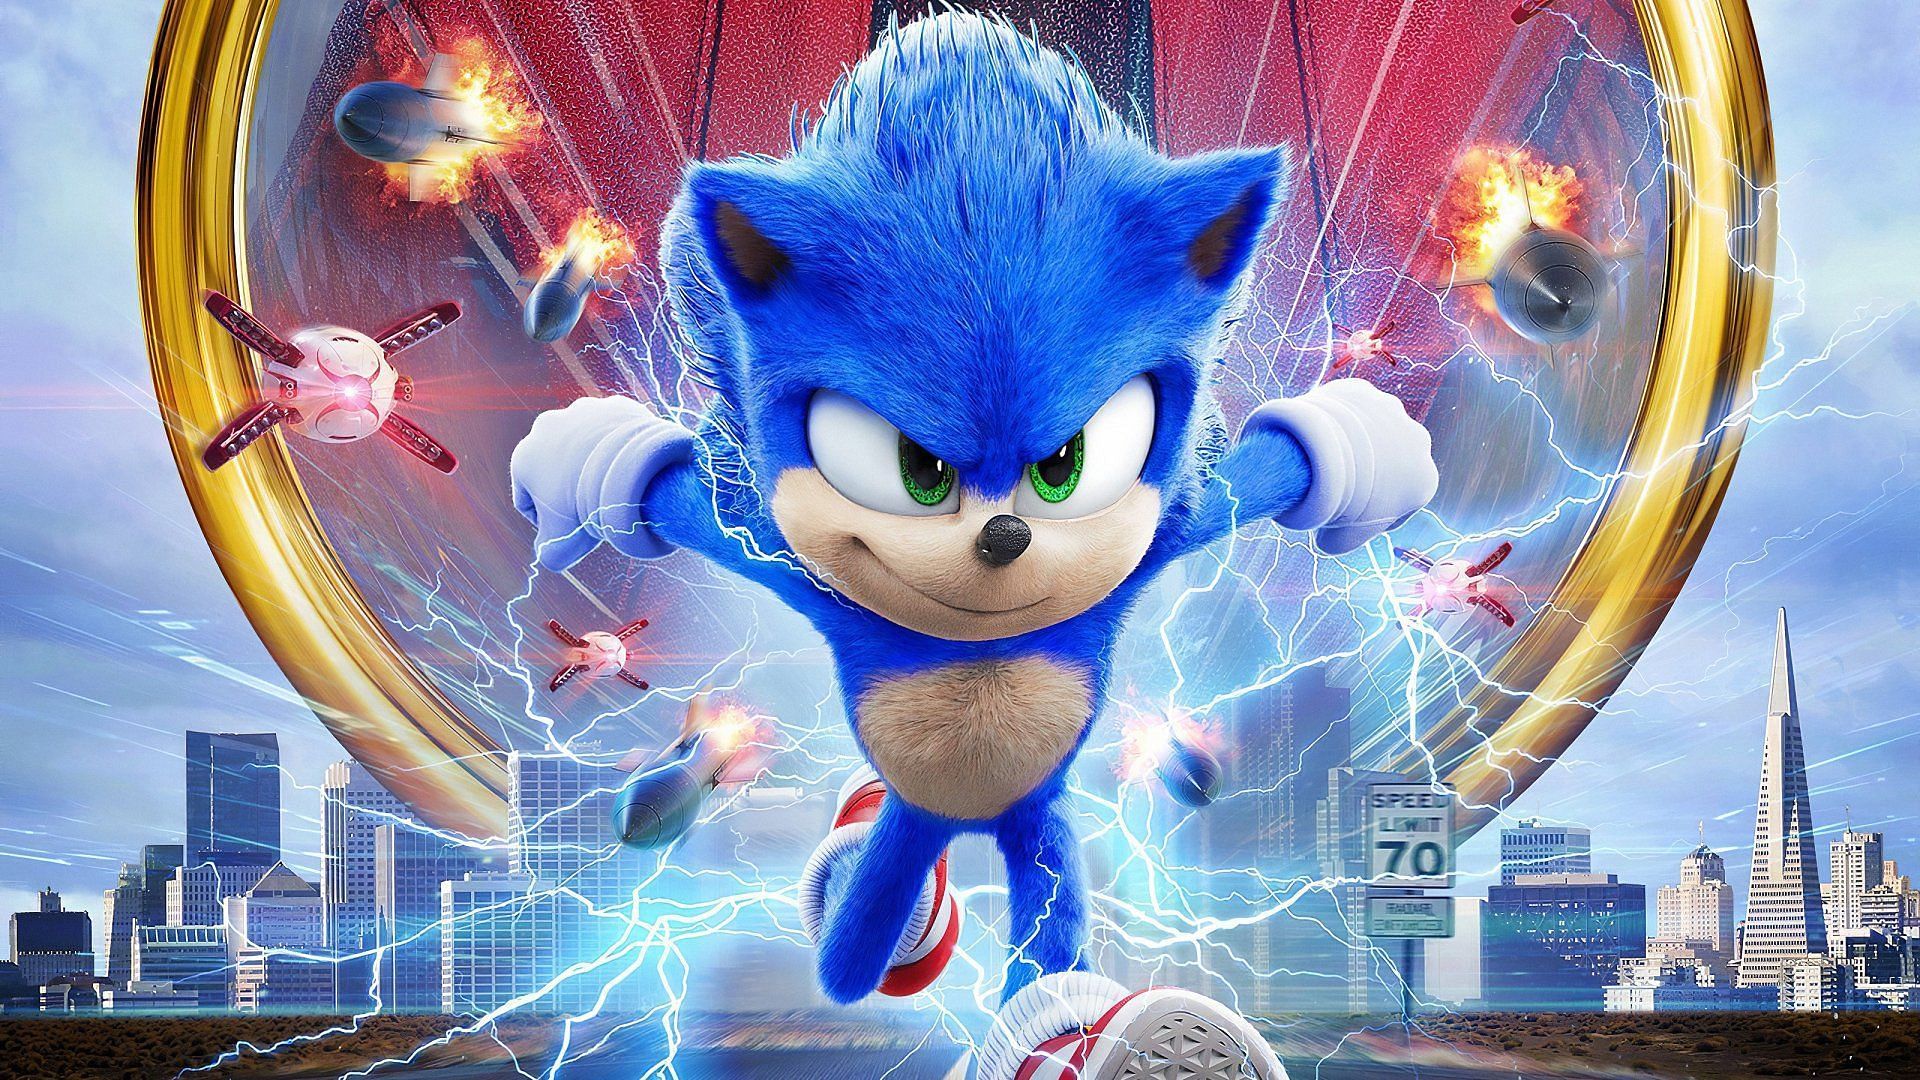 Sonic The Hedgehog 3 Reportedly Finds Way To Film During Actors Strike